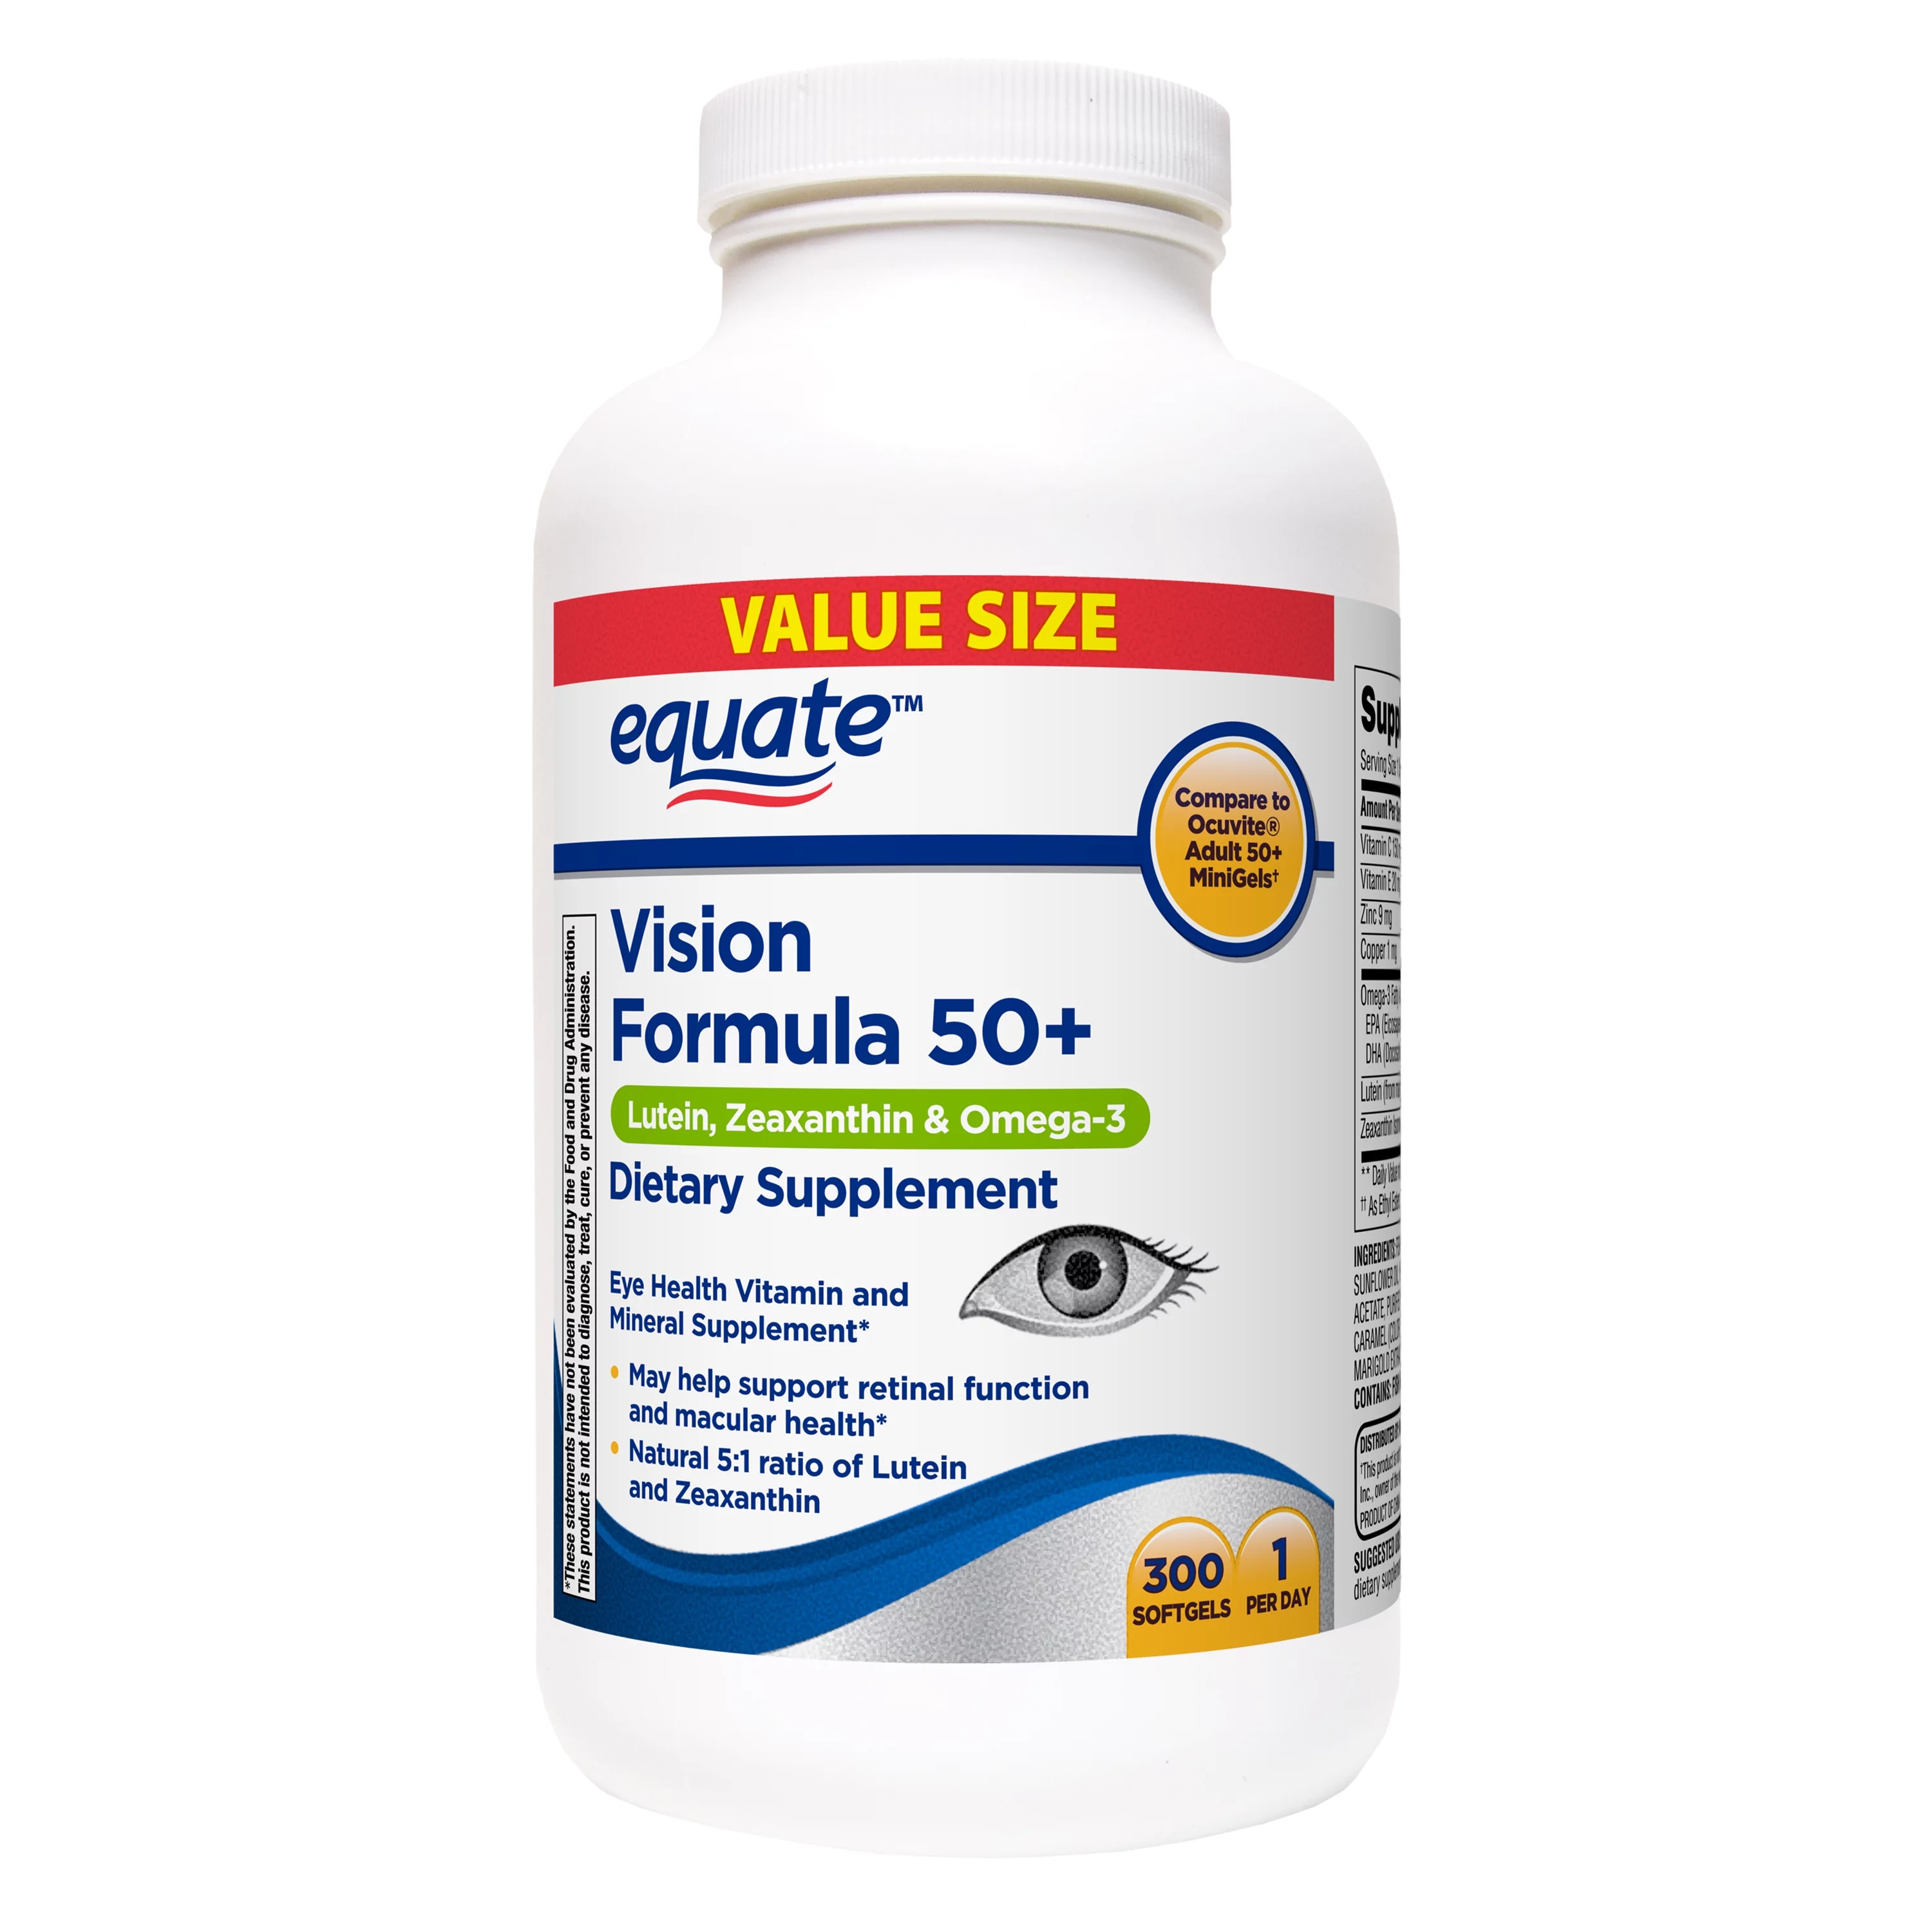 Equate Vision Formula 50+ Soft Gels Dietary Supplement Value Size, 300 Count